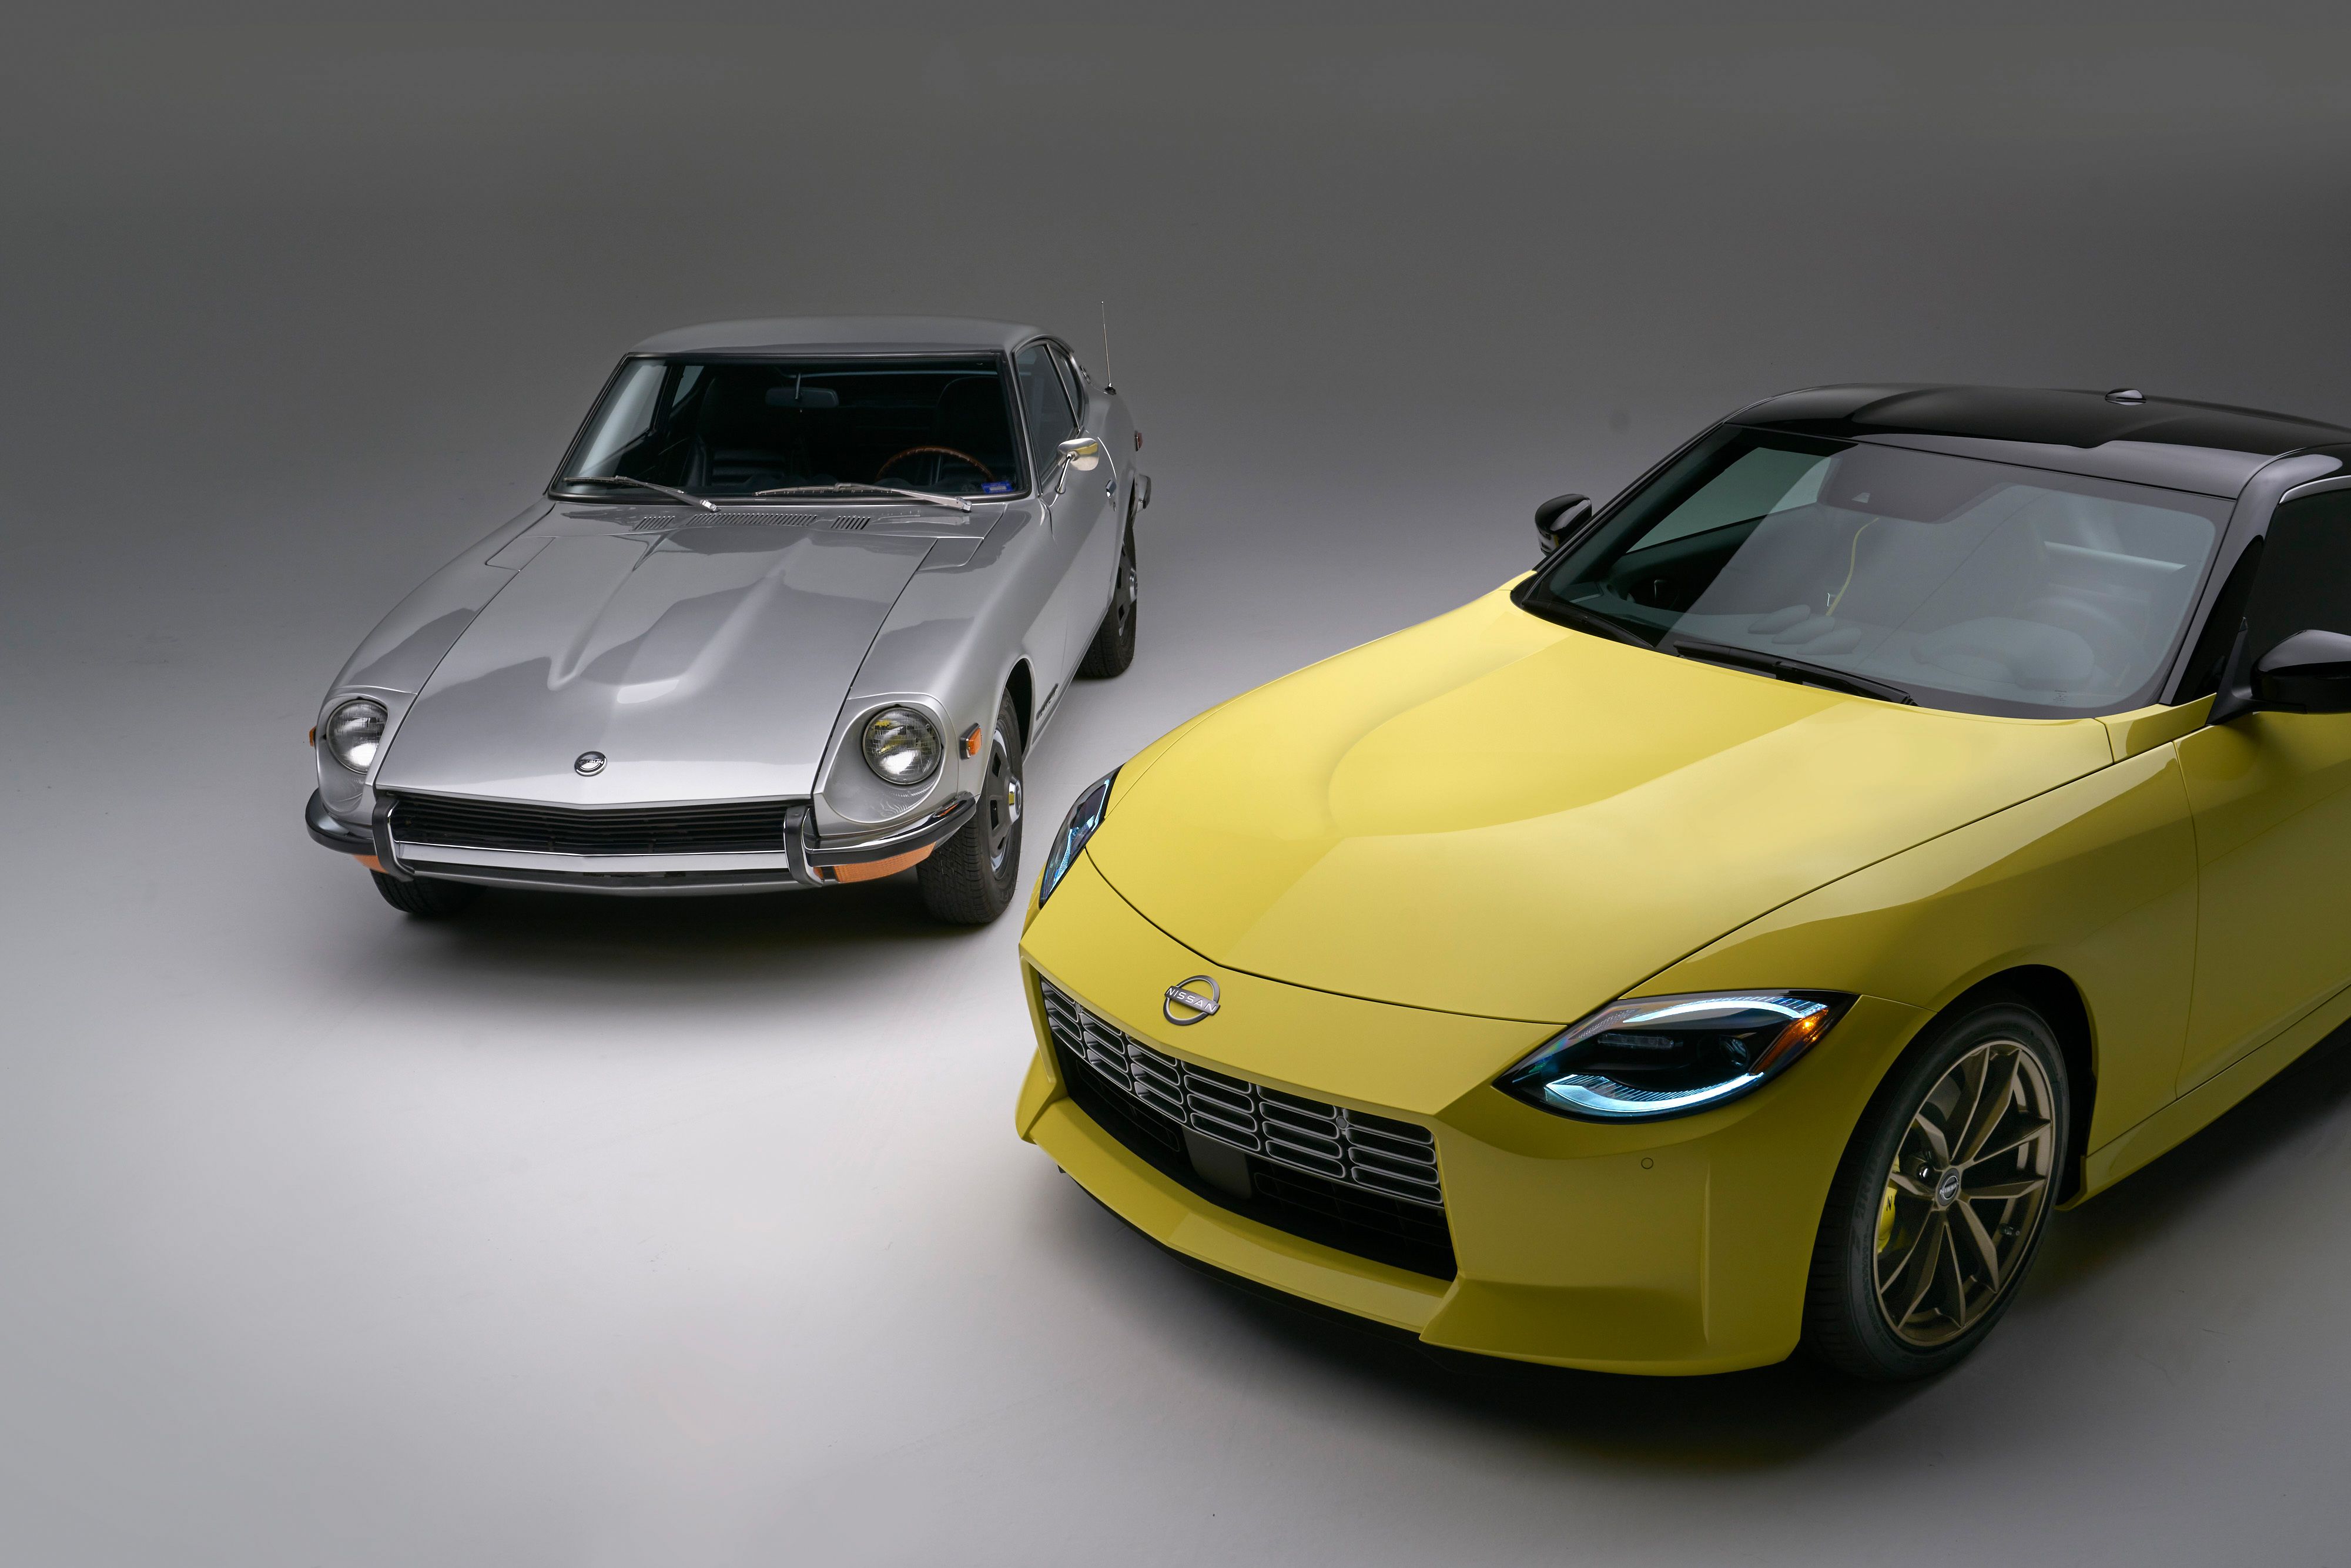 2023 History Of The Nissan Fairlady Z - A Look At How The Japanese Compact Sportscar Has Evolved Over The Years